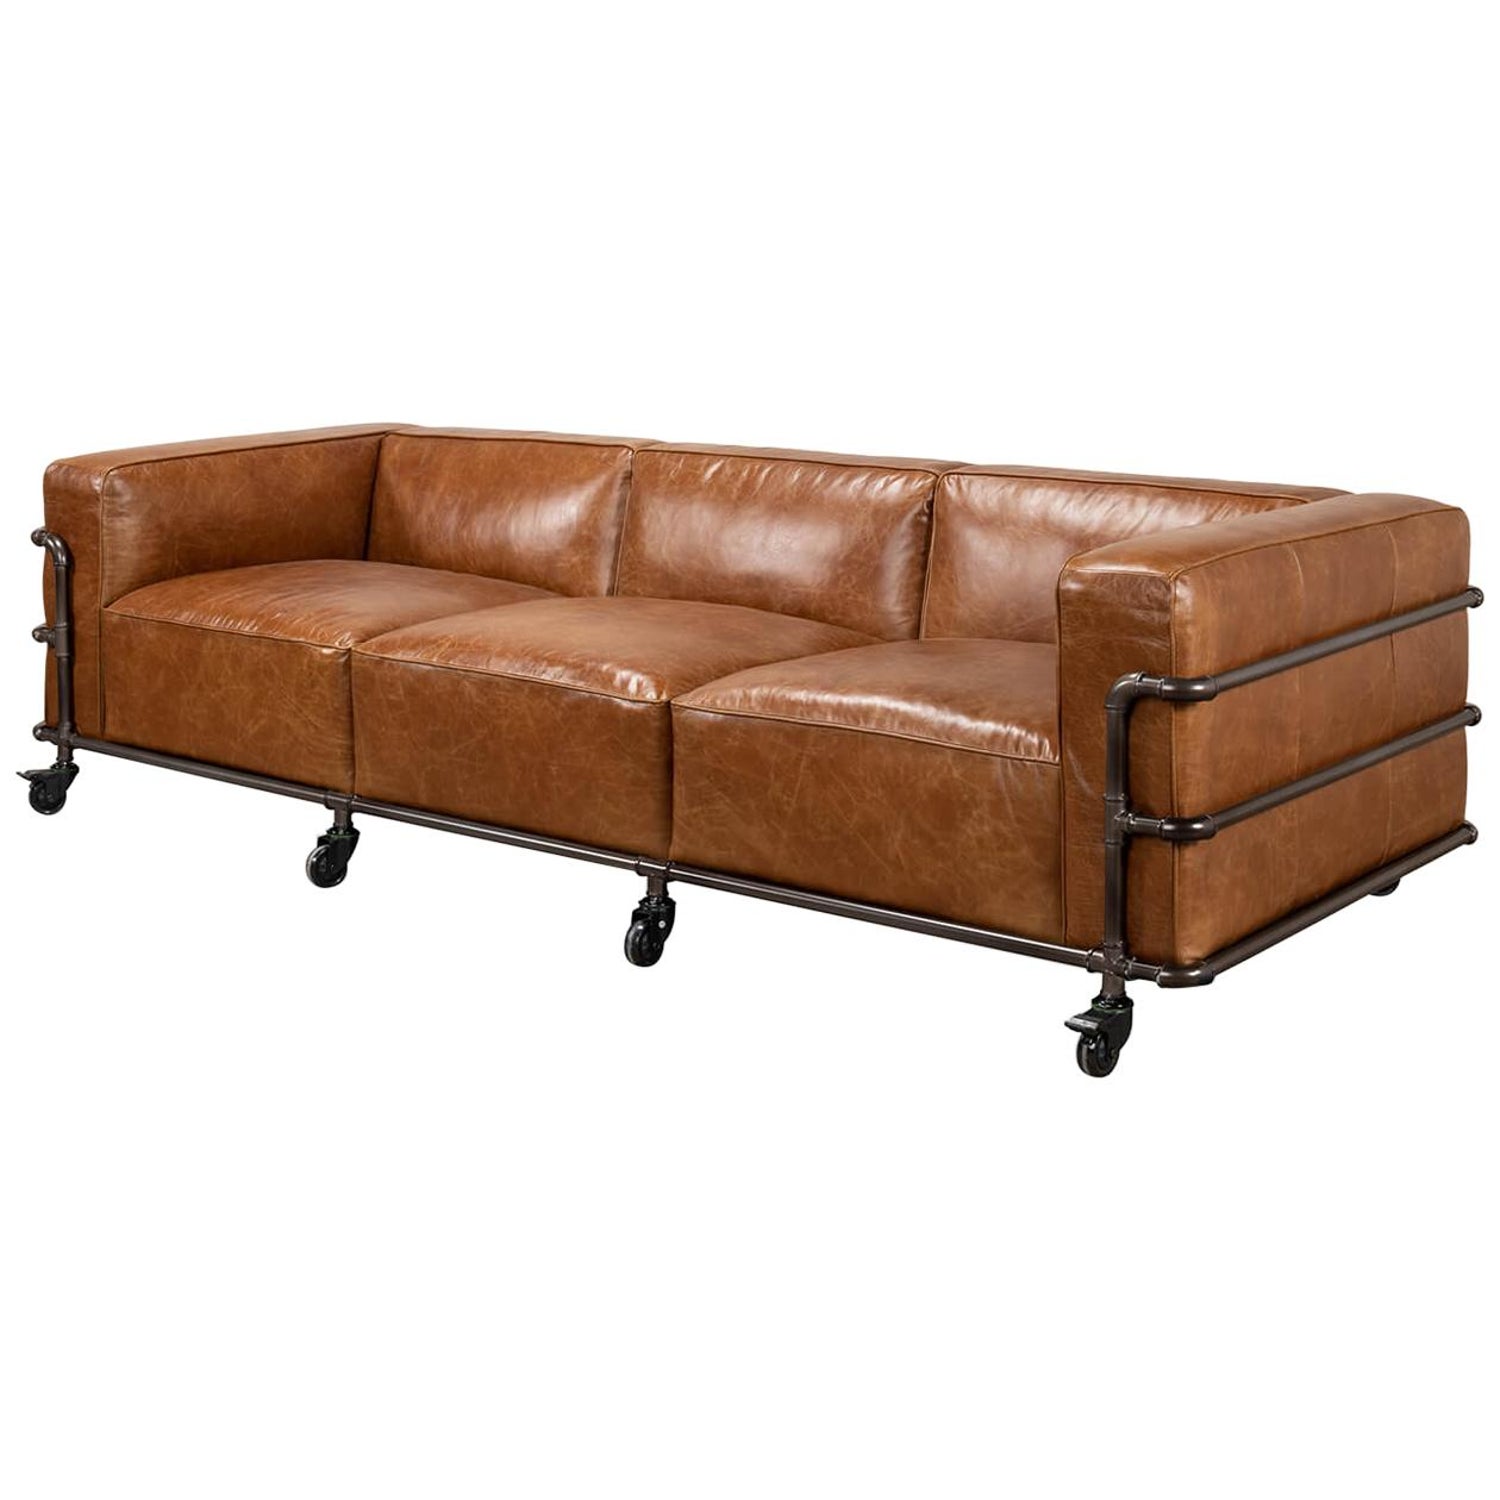 Modern Classic Beveled Leather Sofa For, Classic Leather Couch